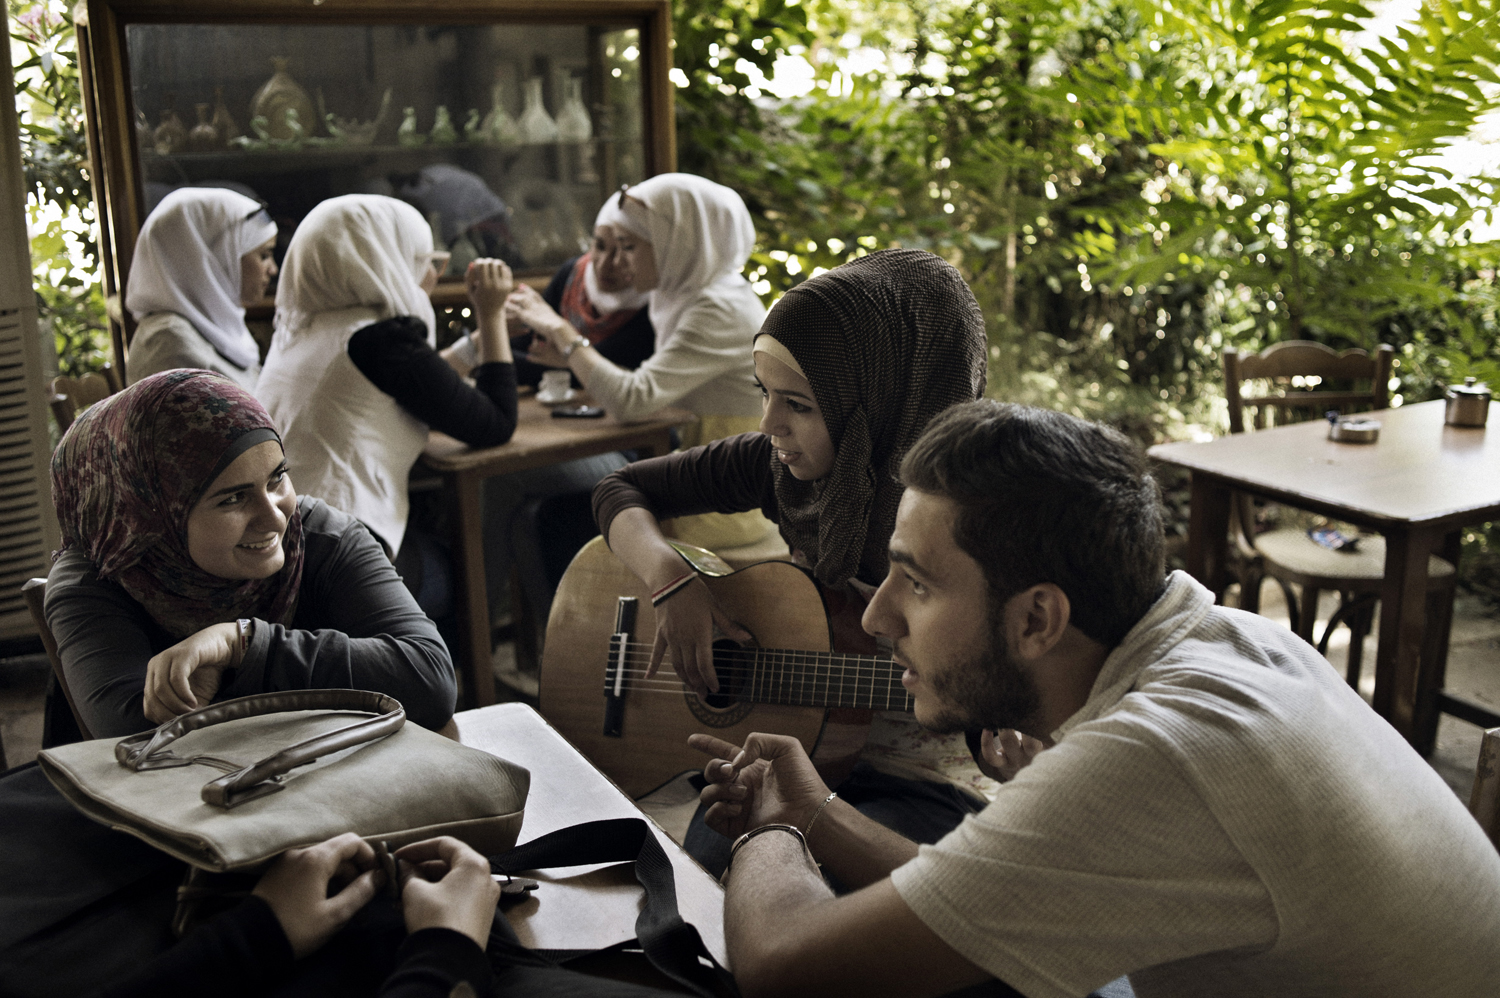 Young Damascenes gather at the café in the garden of the National Museum in Damascus, May 18, 2014.